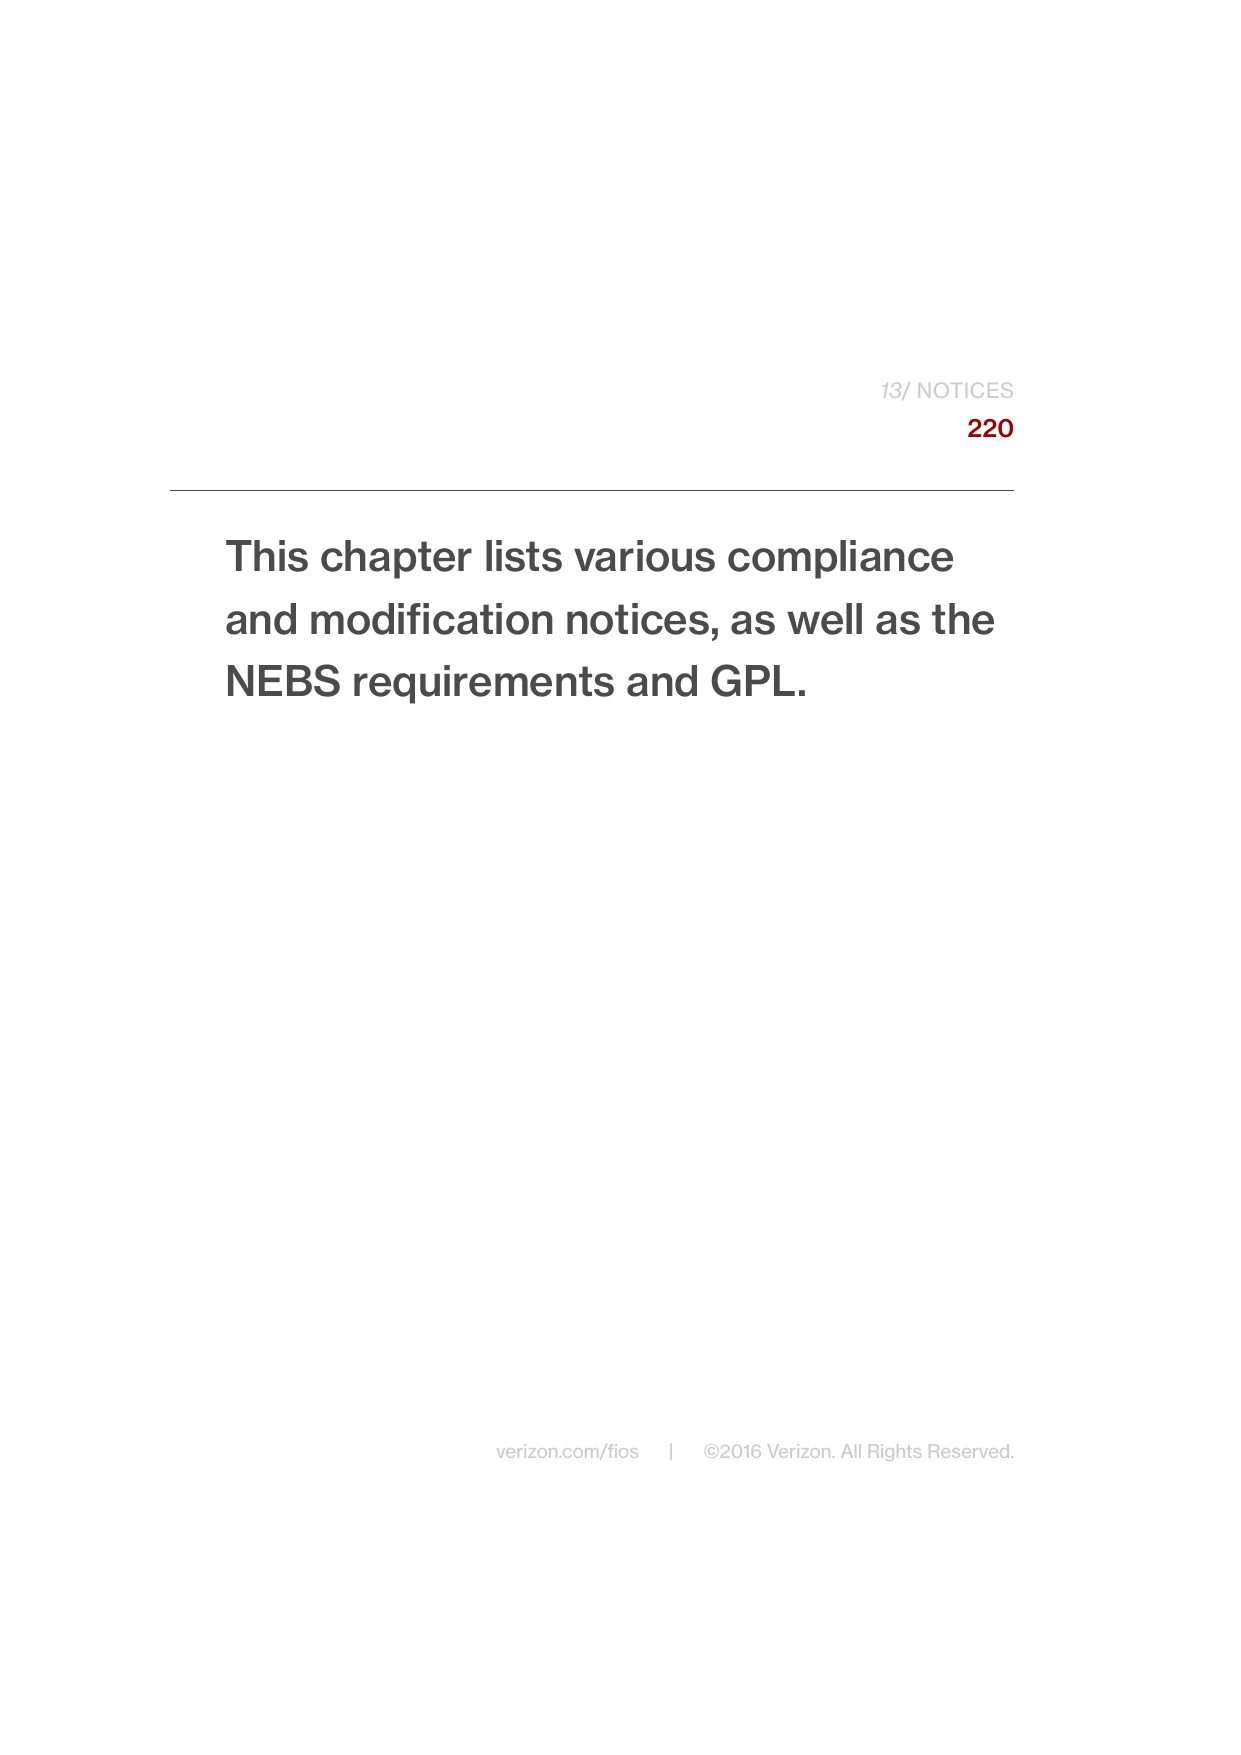 220verizon.com/ﬁos      |      ©2016 Verizon. All Rights Reserved.This chapter lists various compliance and modiﬁcation notices, as well as the NEBS requirements and GPL./ NOTICES